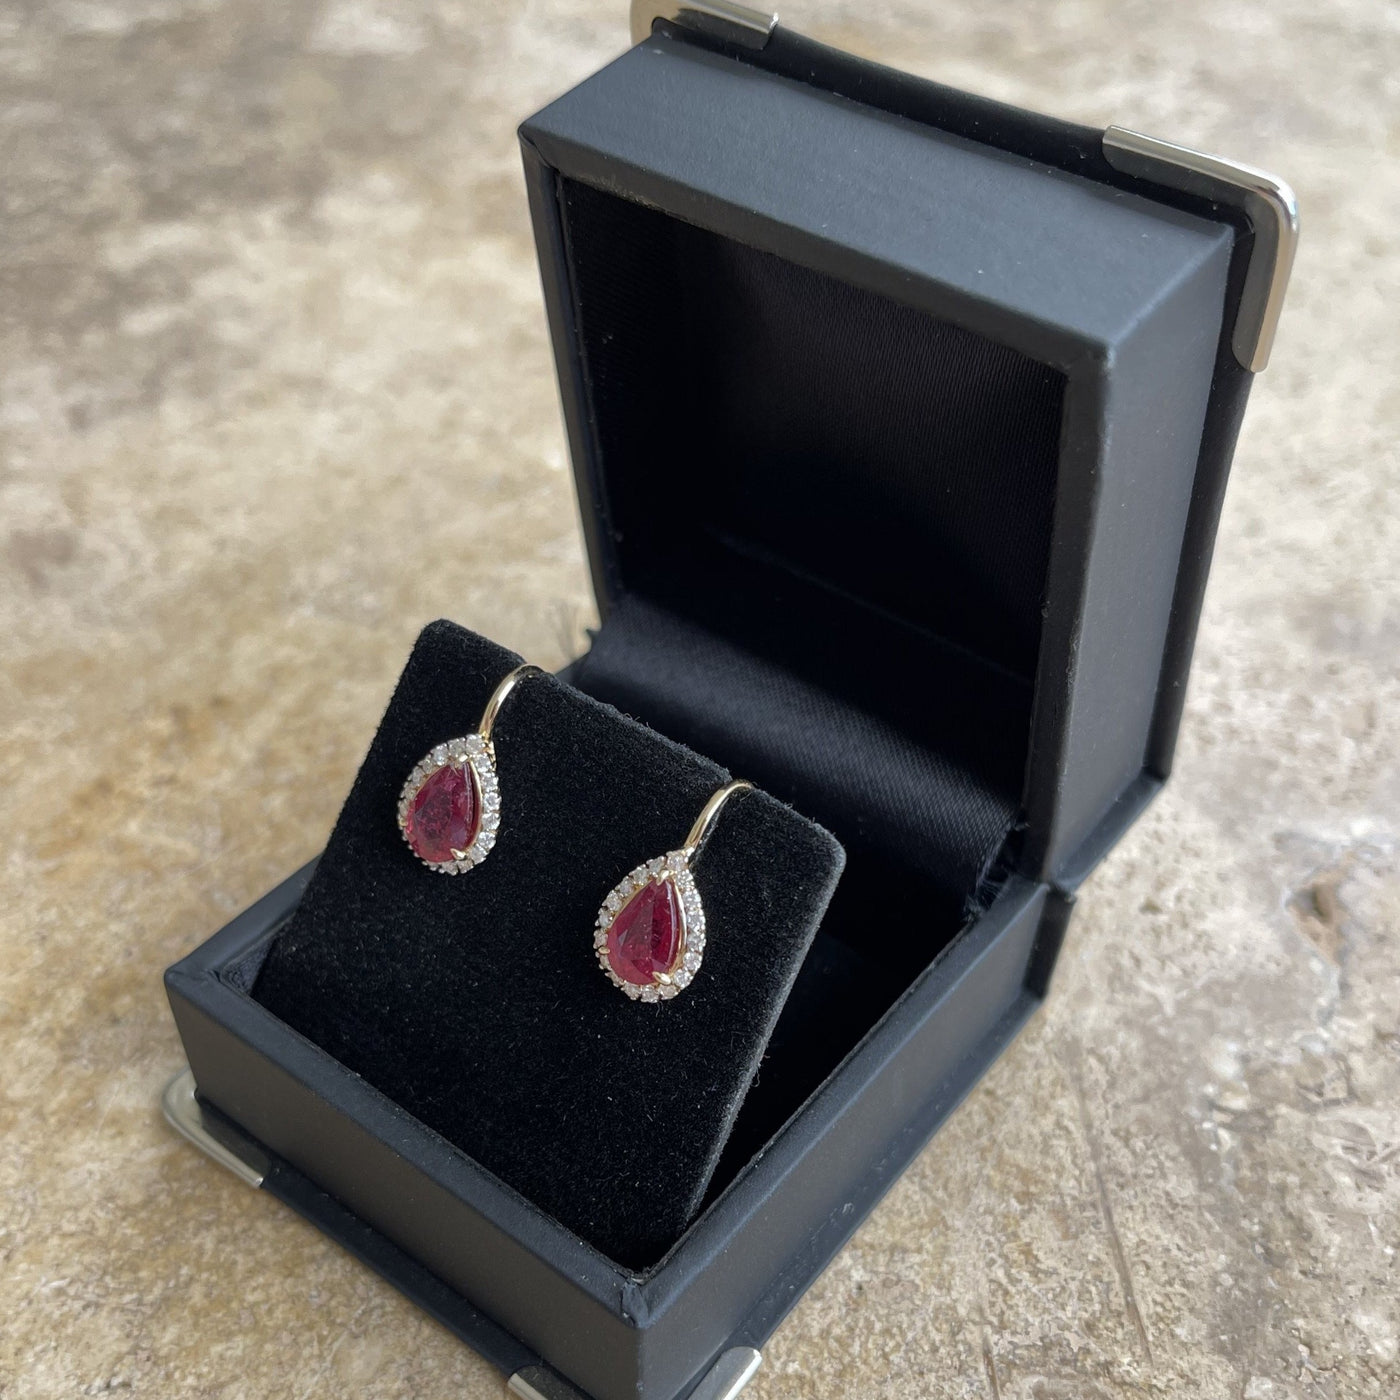 18CT Yellow Gold 'Pear' Ruby and Diamond Earrings